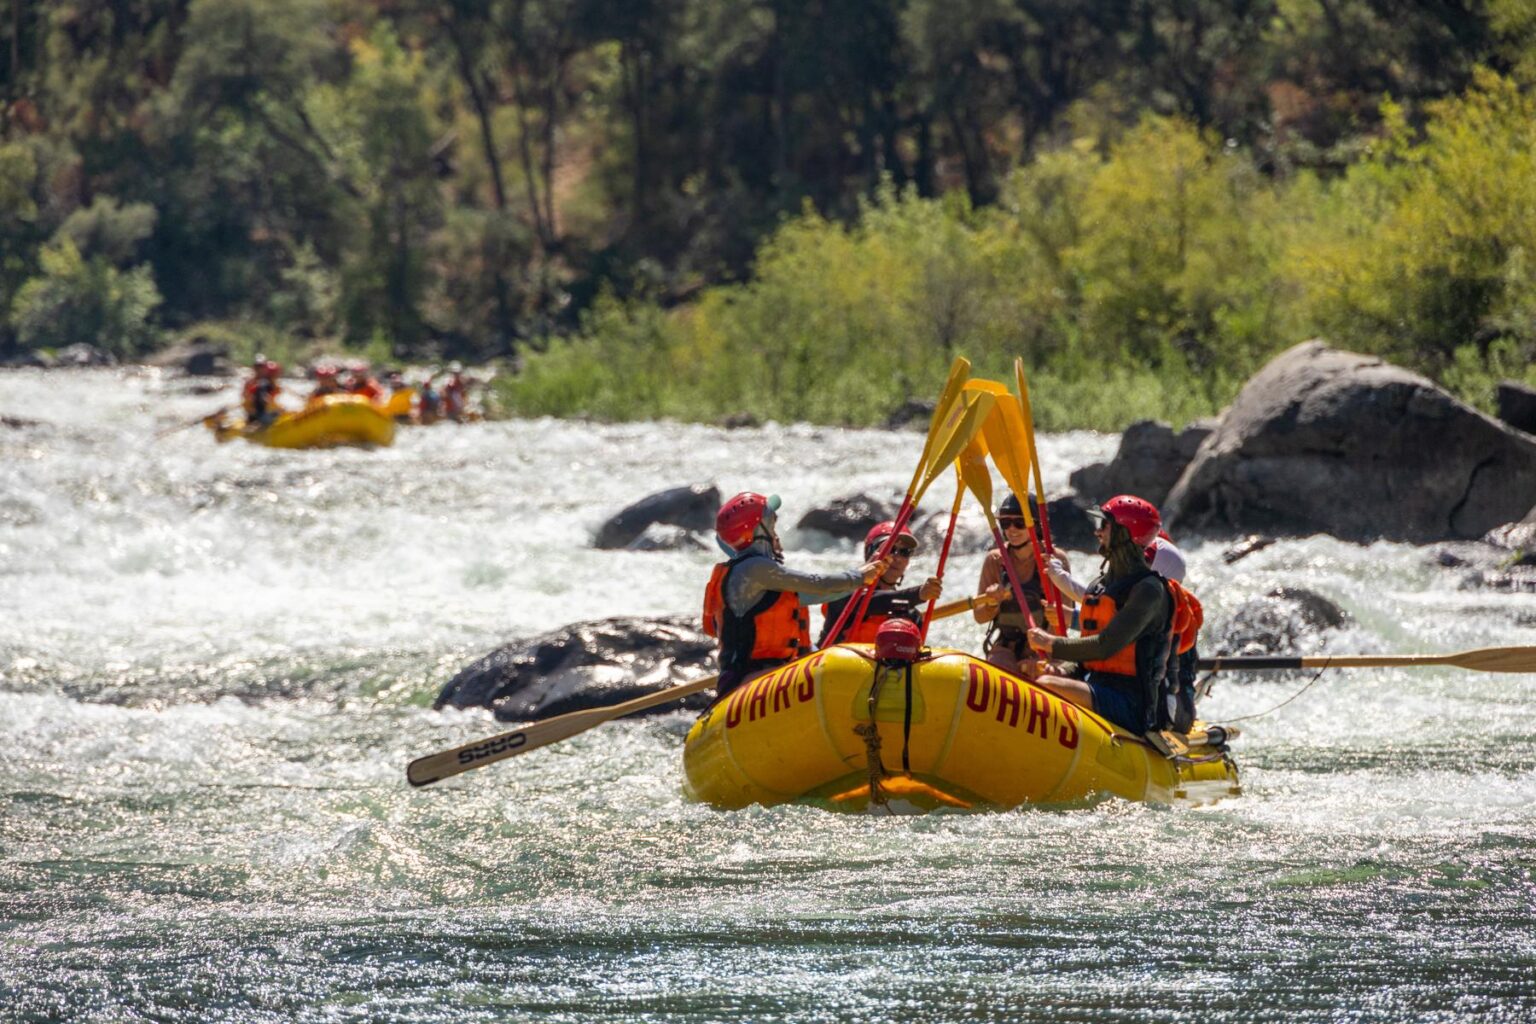 Celebrating after rafting a rapid on the Tuolumne River